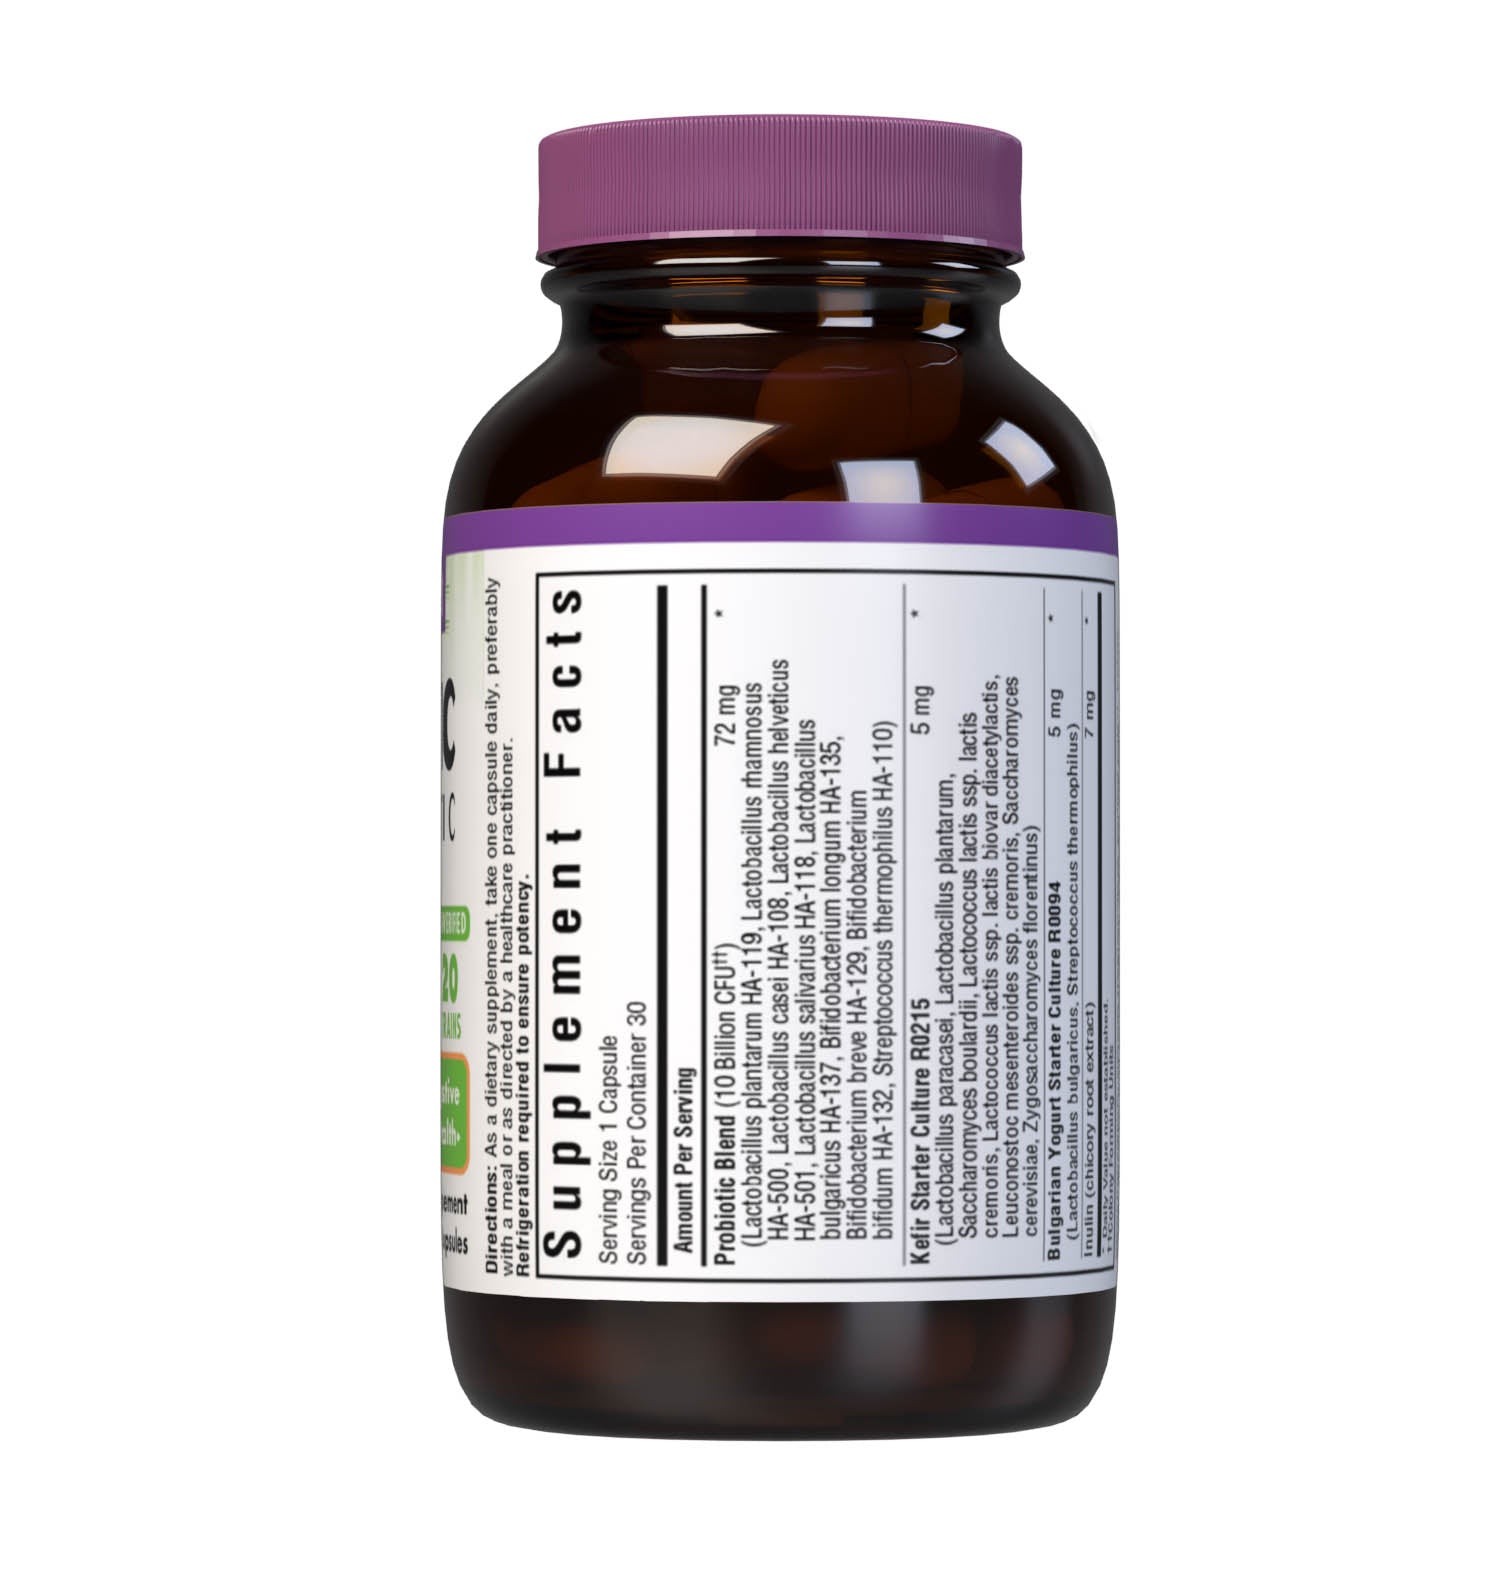 Bluebonnet’s Probiotic & Prebiotic 30 Vegetable Capsules are formulated with 10 billion viable cultures from 20 DNA-verified, scientifically supported strains. This unique, science-based probiotic formula includes the prebiotic inulin from chicory root extract, to assist the growth of friendly bacterium in the gut. Supplement facts panel. #size_30 count